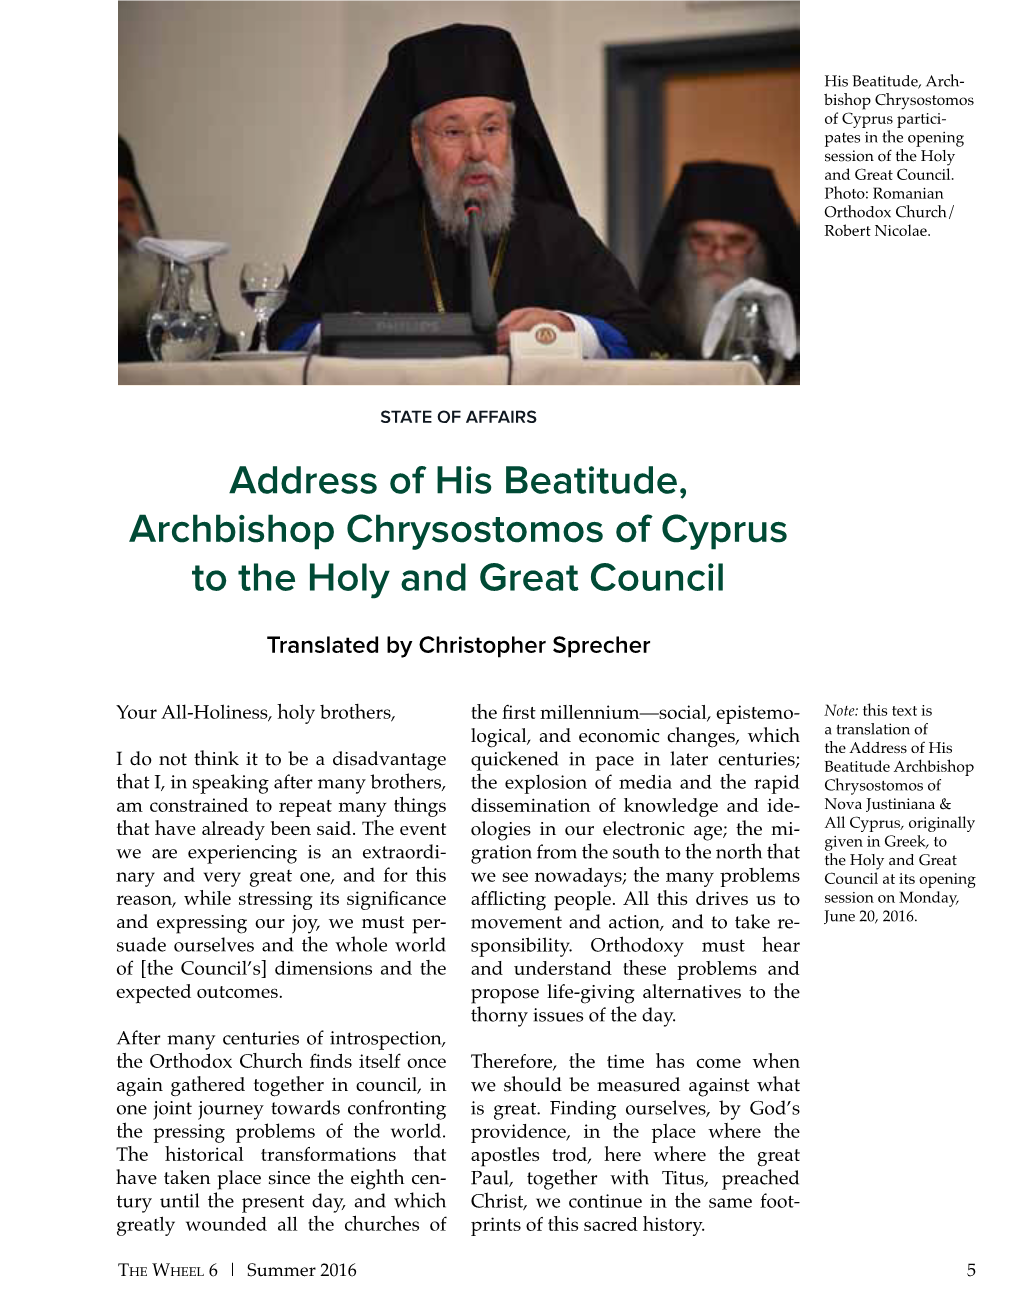 Address of His Beatitude, Archbishop Chrysostomos of Cyprus to the Holy and Great Council